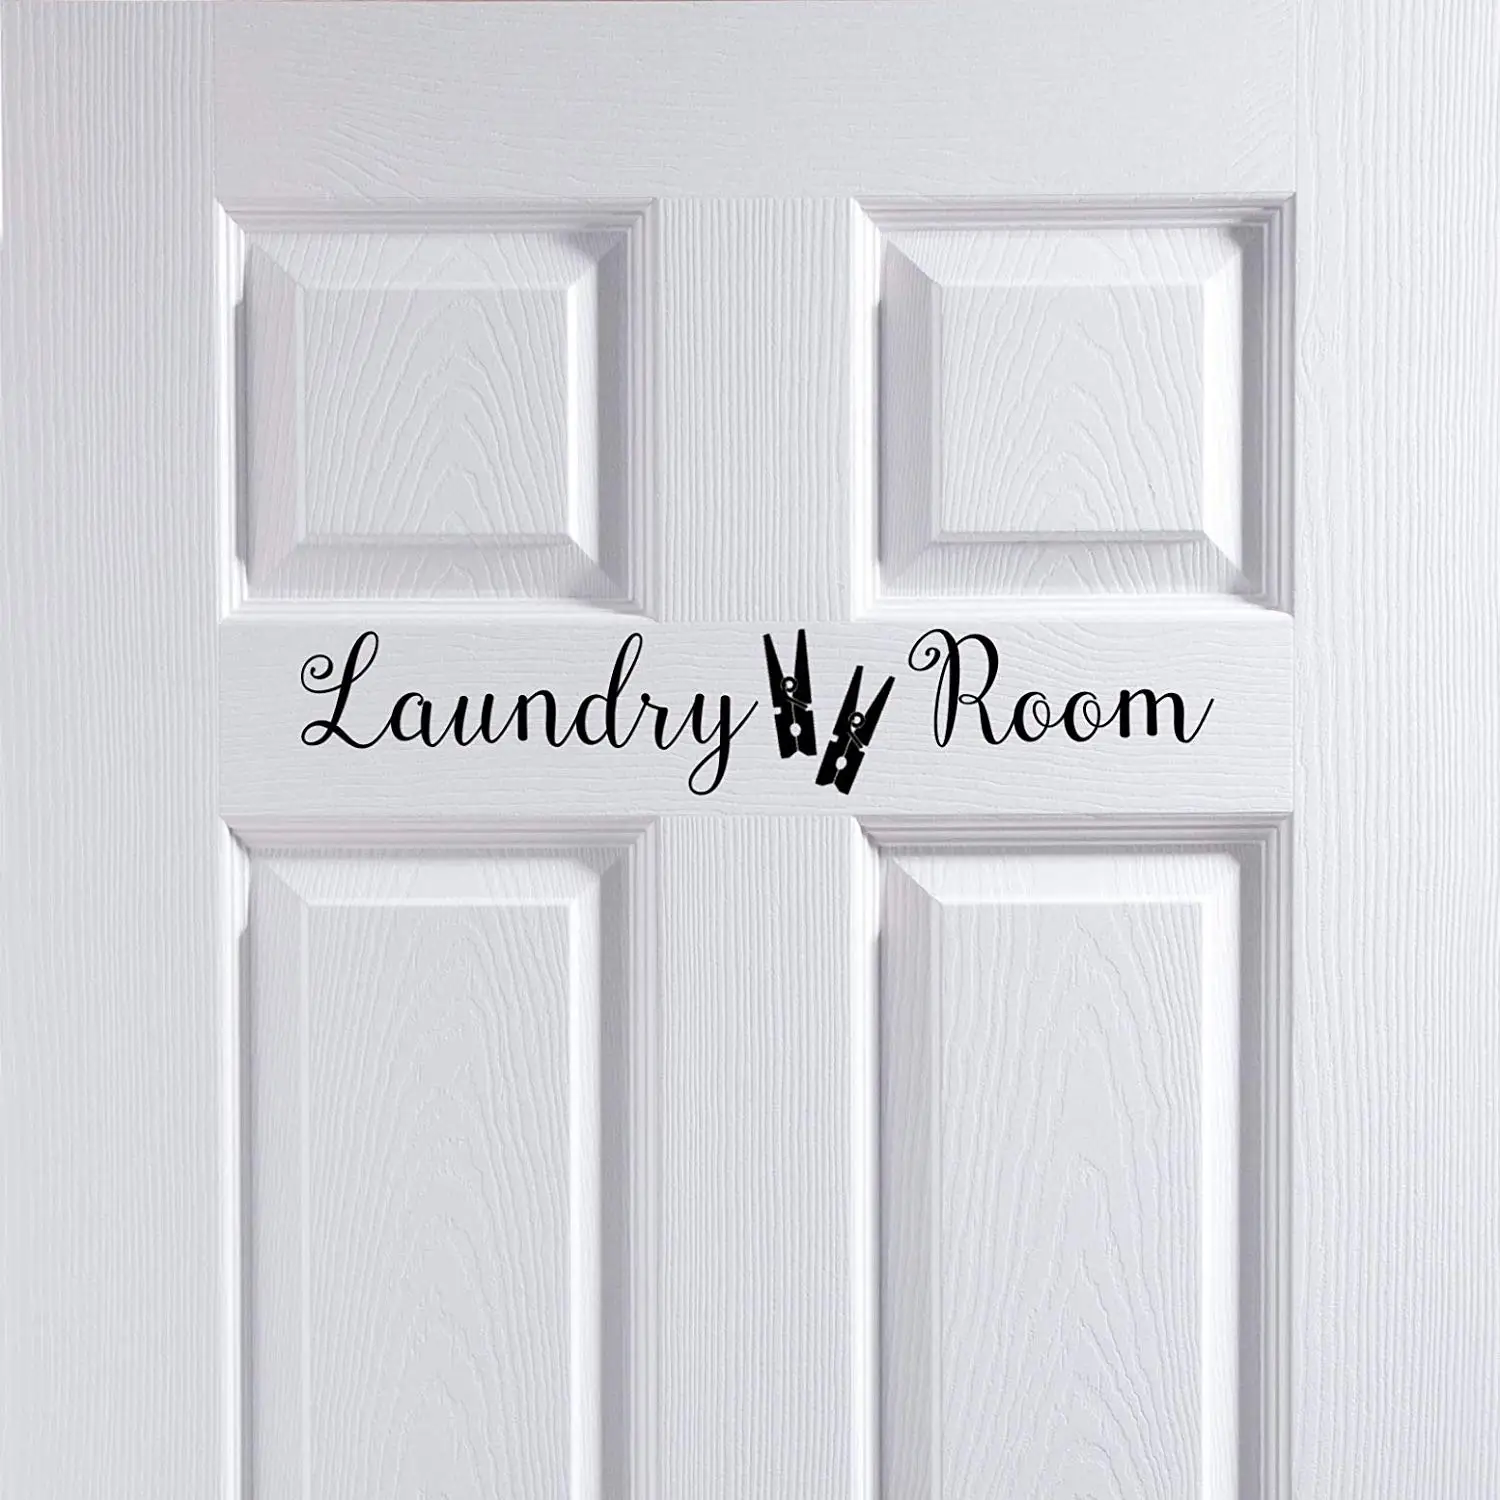 Cheap Laundry Room Vinyl Find Laundry Room Vinyl Deals On Line At